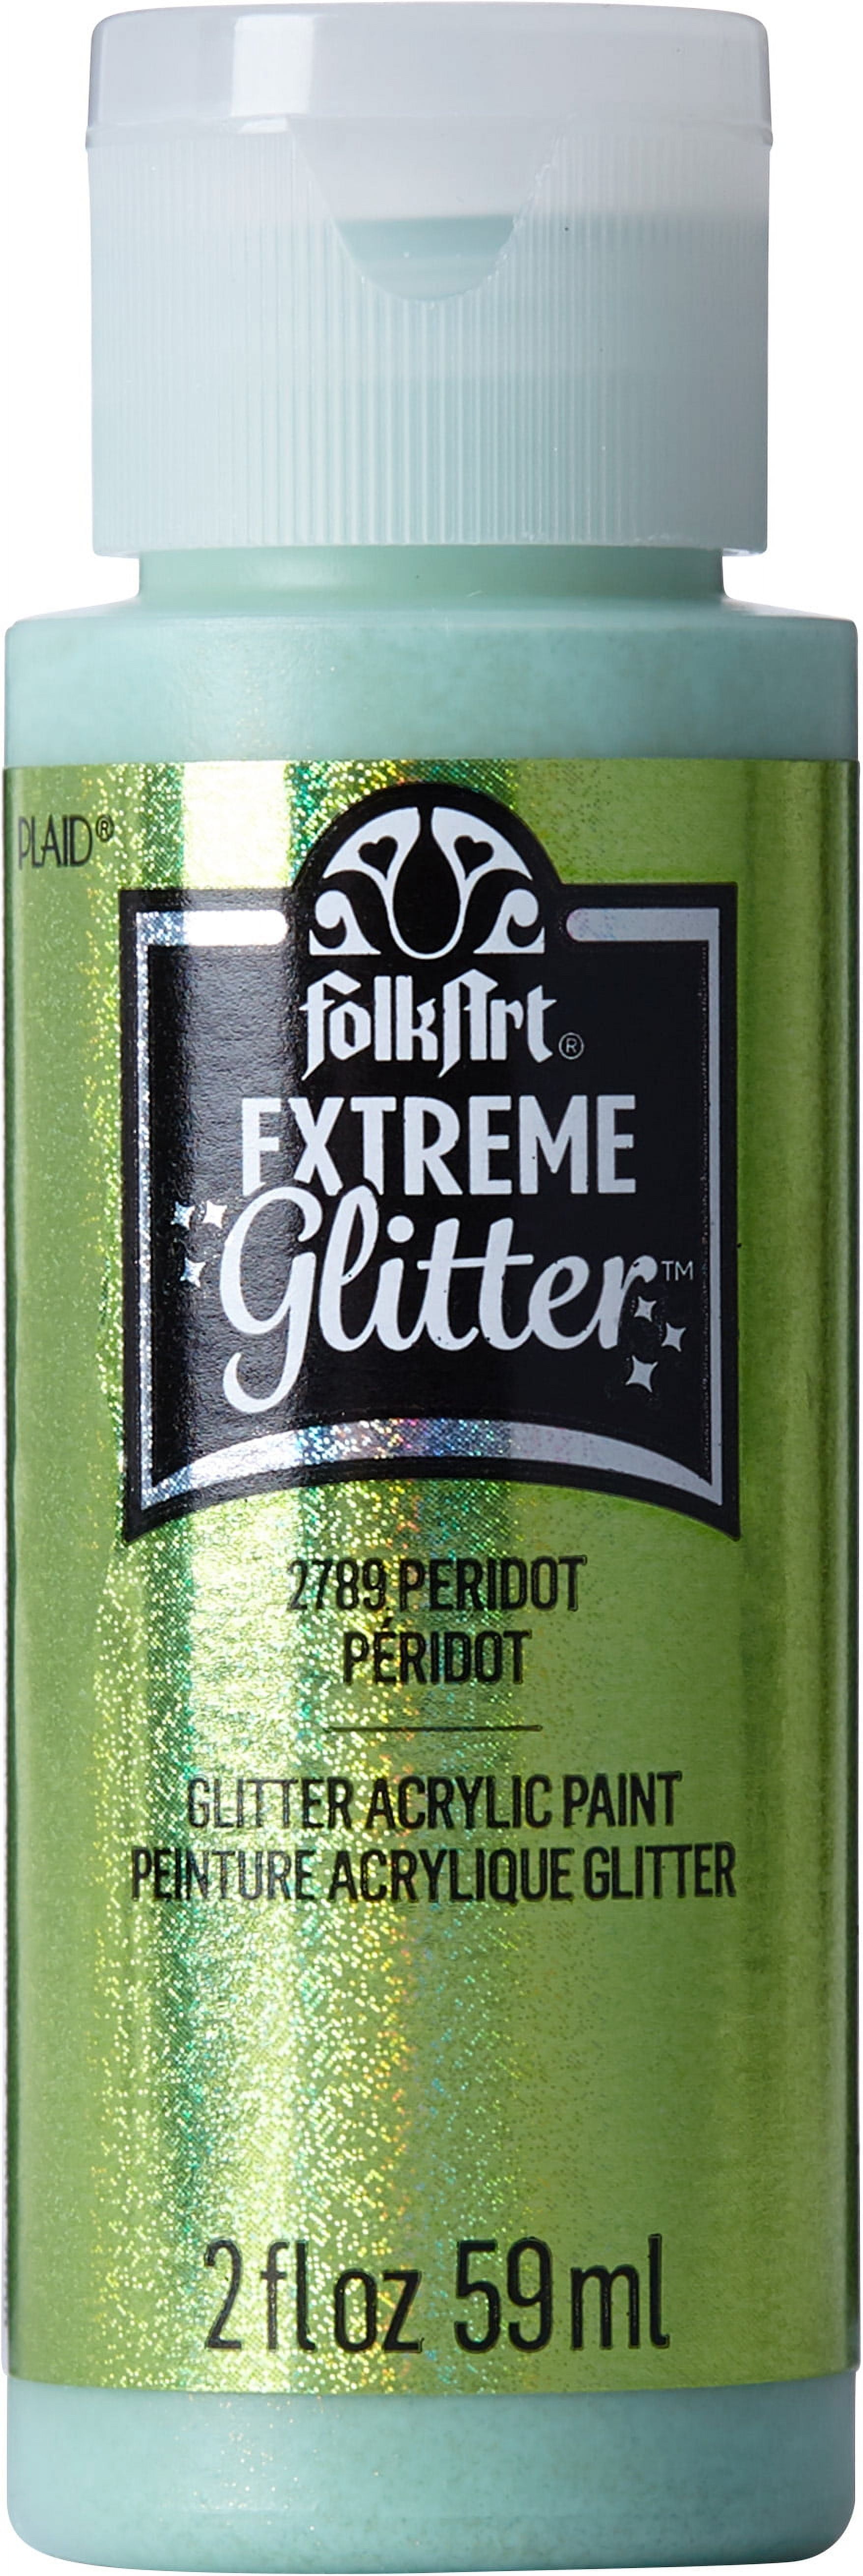 FolkArt Extreme Glitter Acrylic Paint in Assorted Colors (2 oz), 2787,  Silver